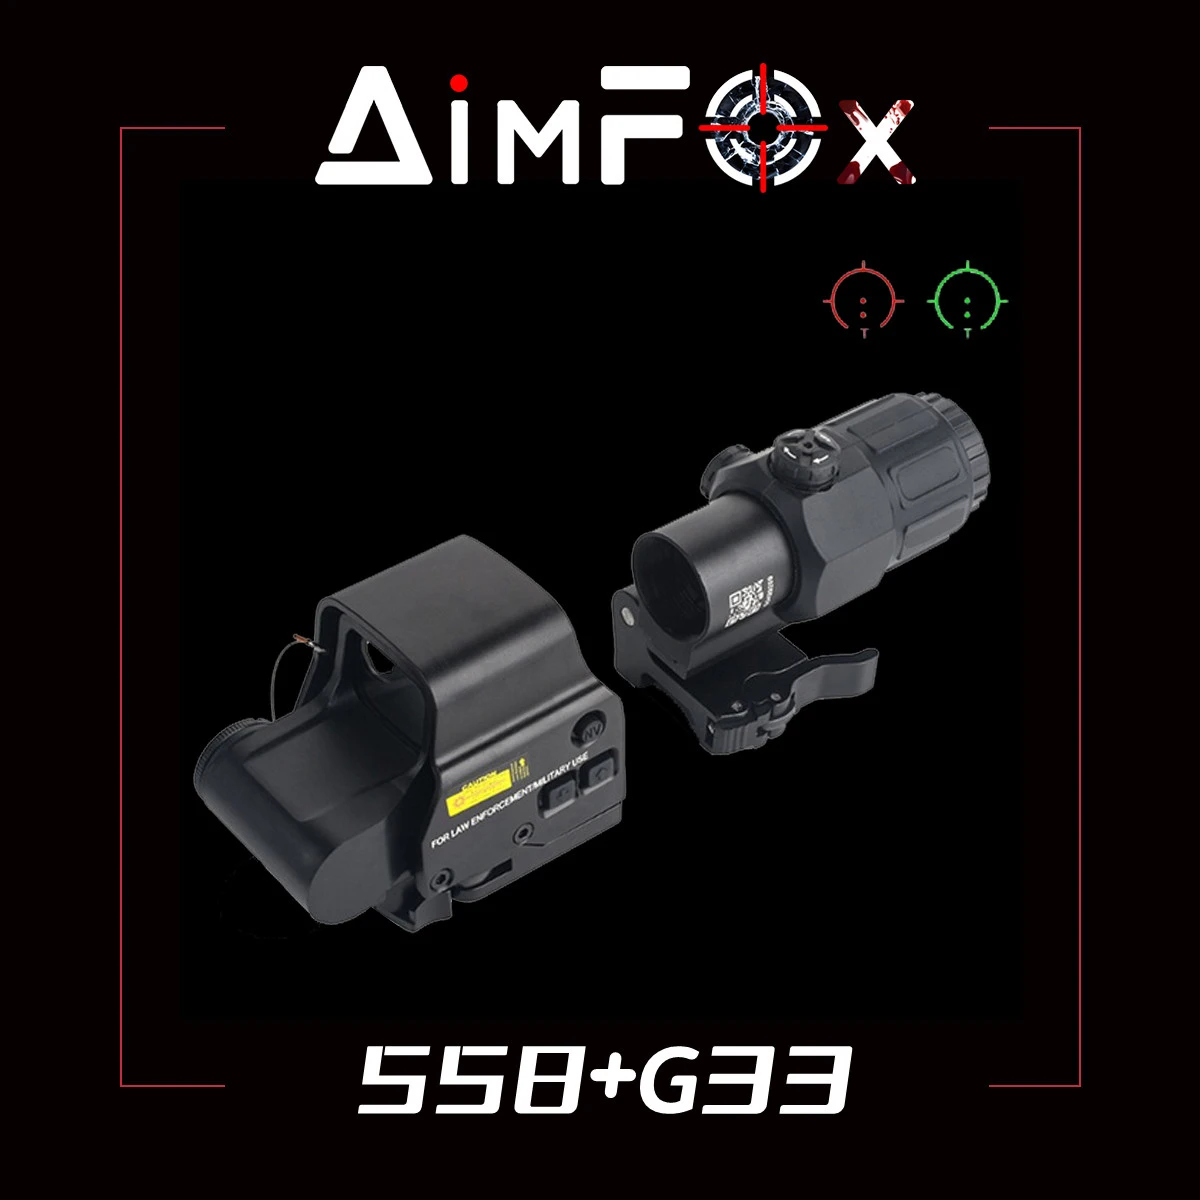 

551 552 553 558 G33 Red Green Dot Holographic Sight Scope Hunting Red Dot Reflex Sight Riflescope 20mm Mount For Airsoft Gun